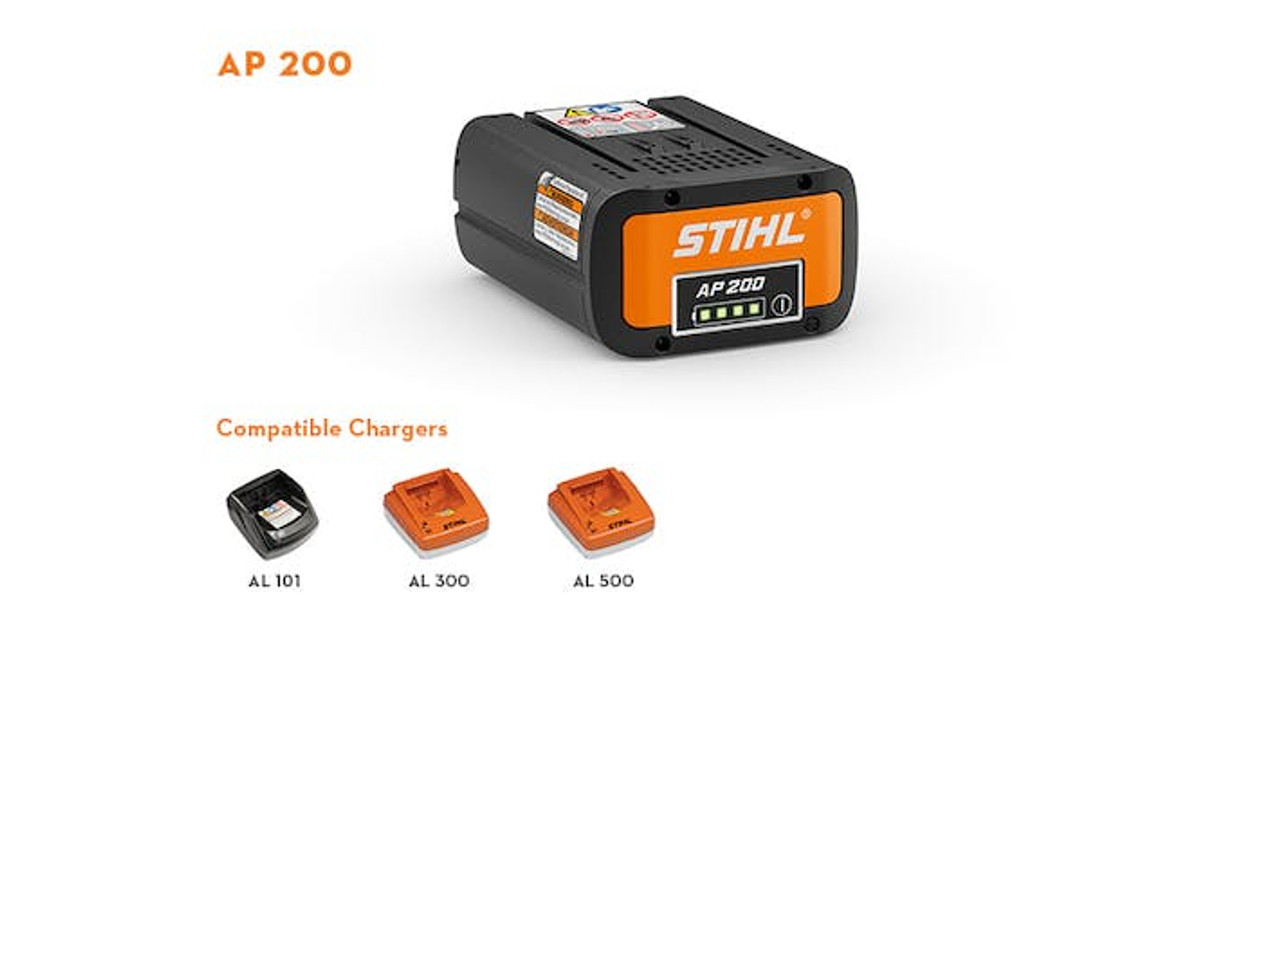 AP 200 Lithium-Ion Battery